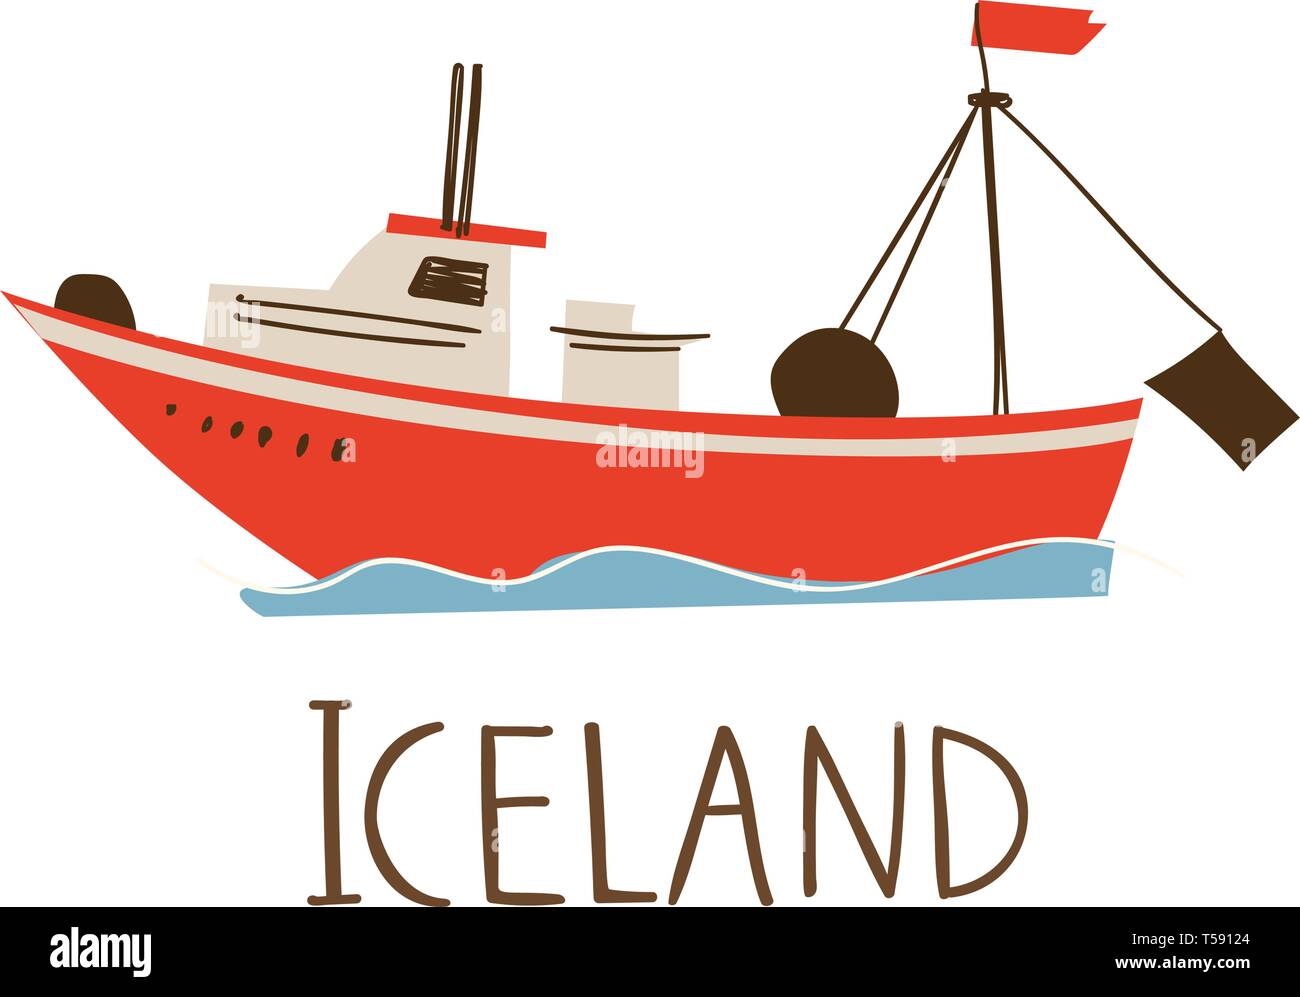 Iceland vector symbol ocean fishing boat with text Stock Vector